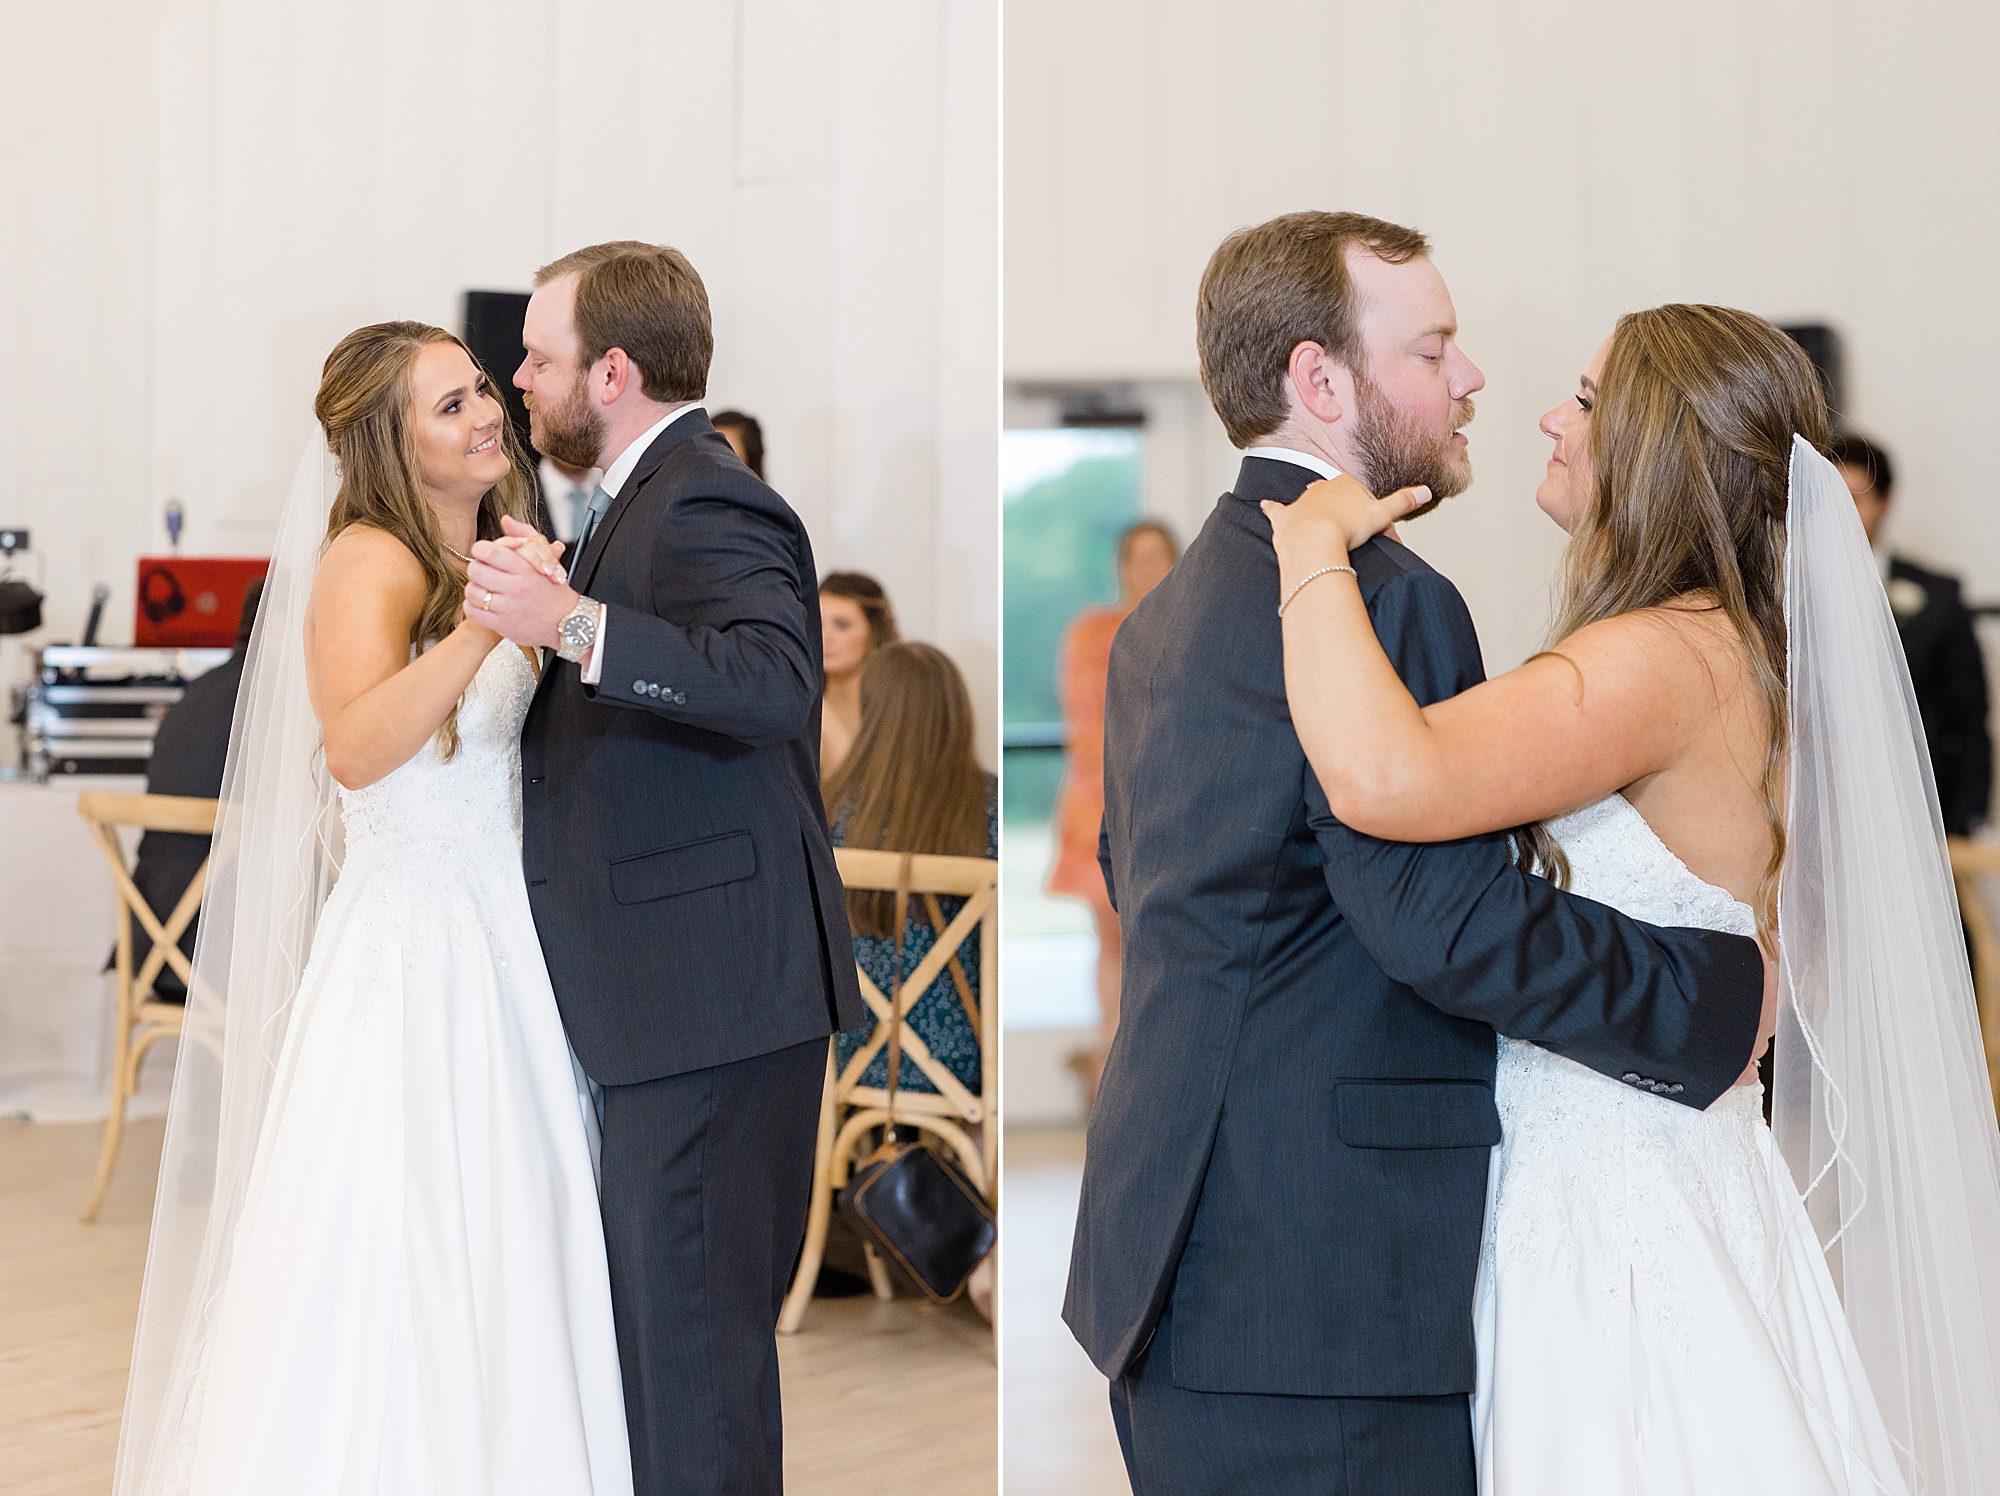 newlyweds have first dance at Texas wedding reception